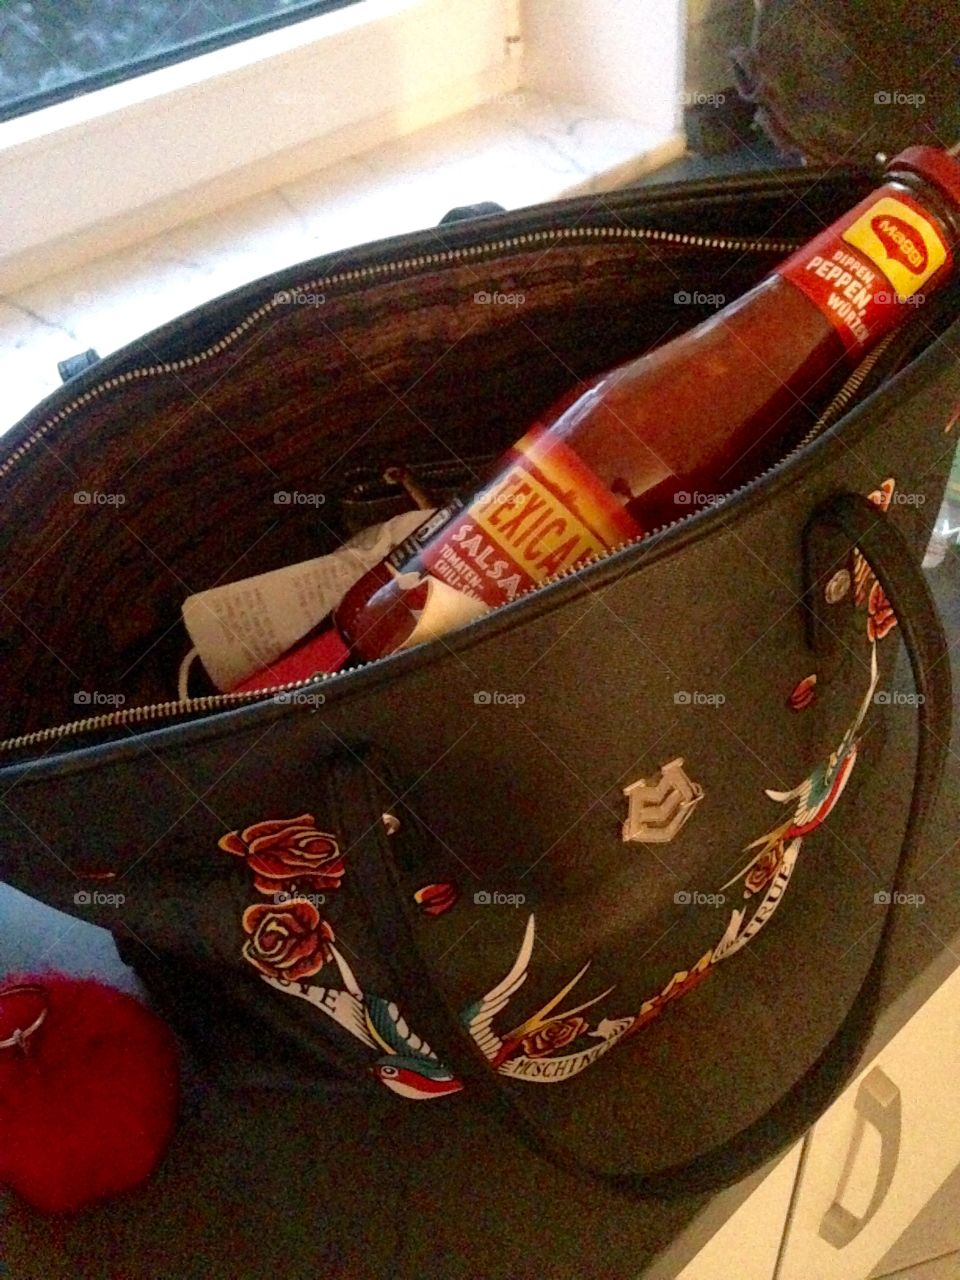 I got hot sauce in my bag. Swag! 